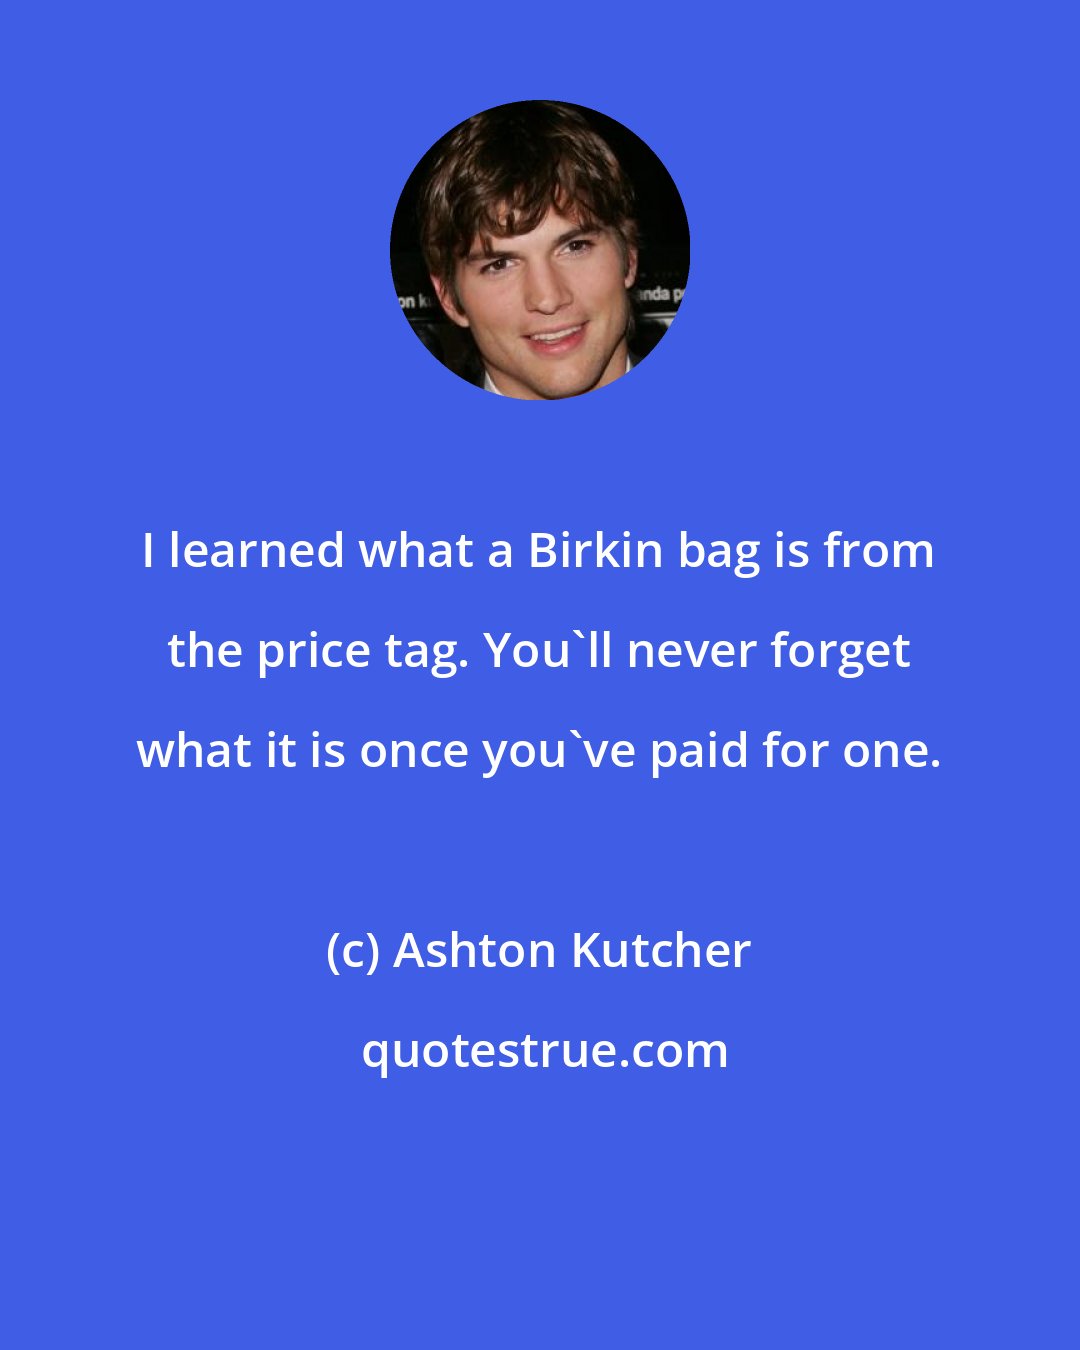 Ashton Kutcher: I learned what a Birkin bag is from the price tag. You'll never forget what it is once you've paid for one.